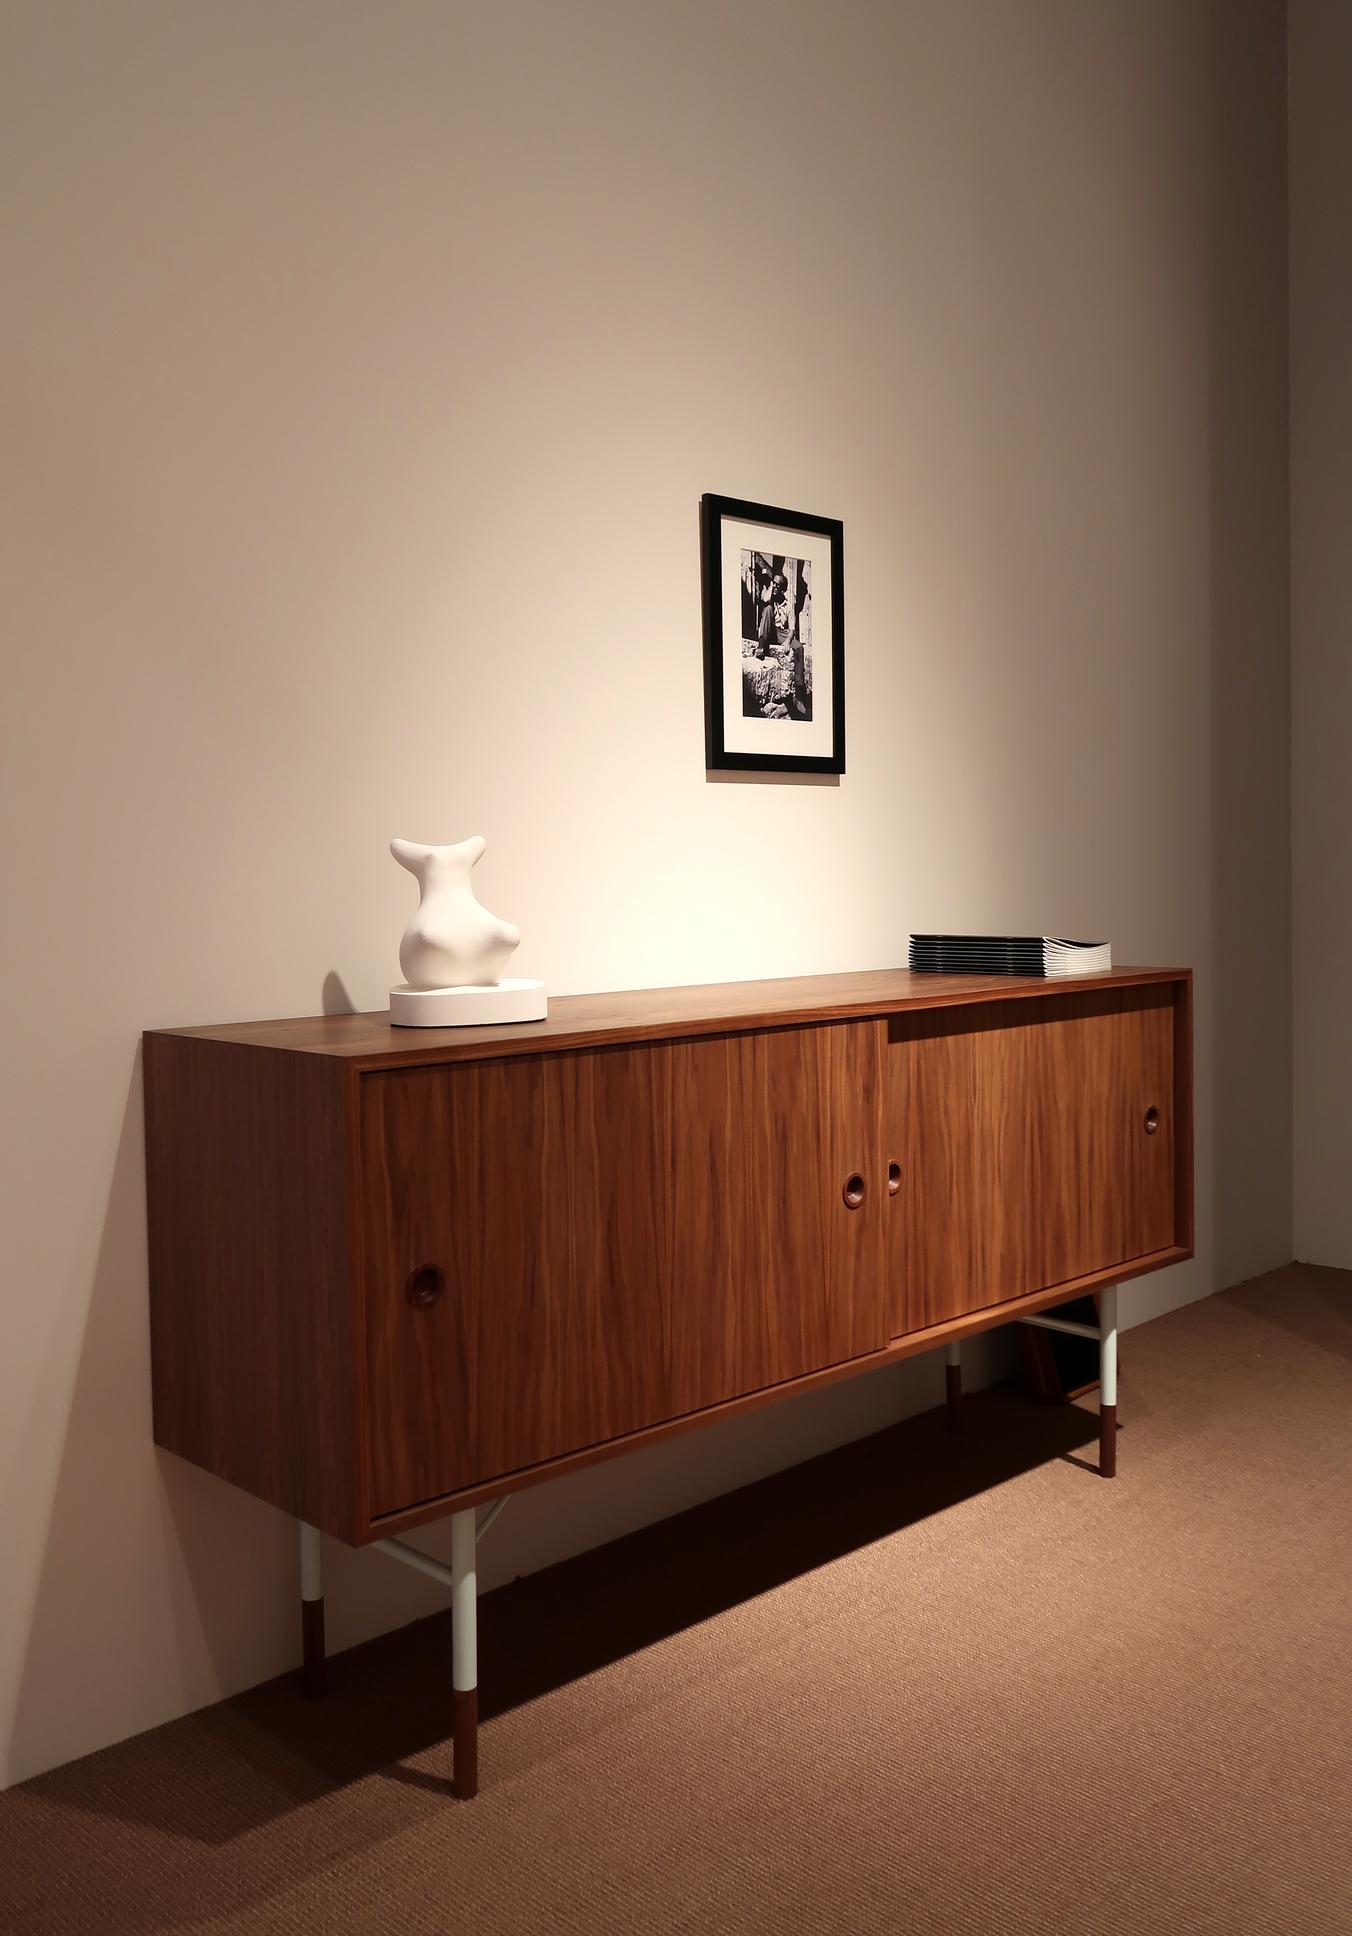 Danish Finn Juhl Sideboard in Wood and whit Unit Tray in Cold Colors